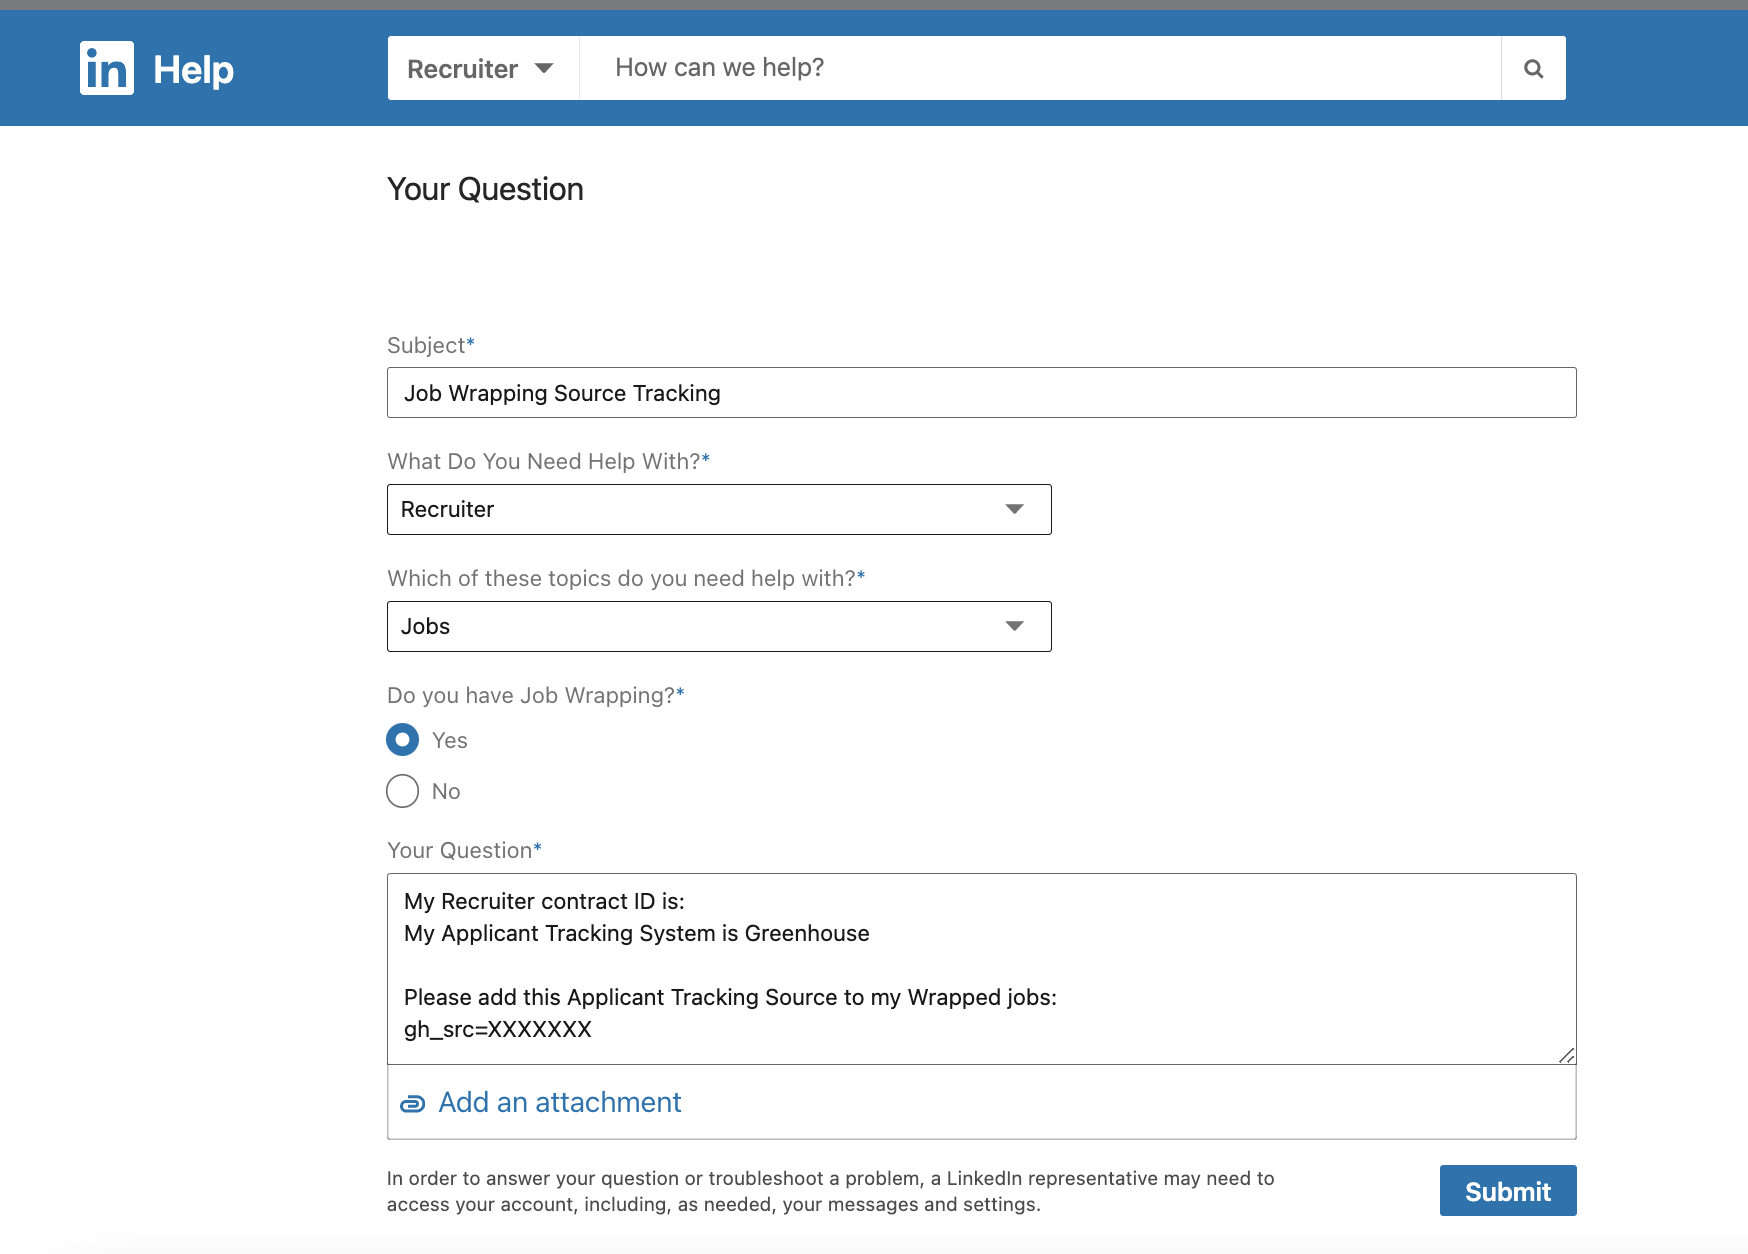 An example LinkedIn Support template is shown with the relevant information filled out